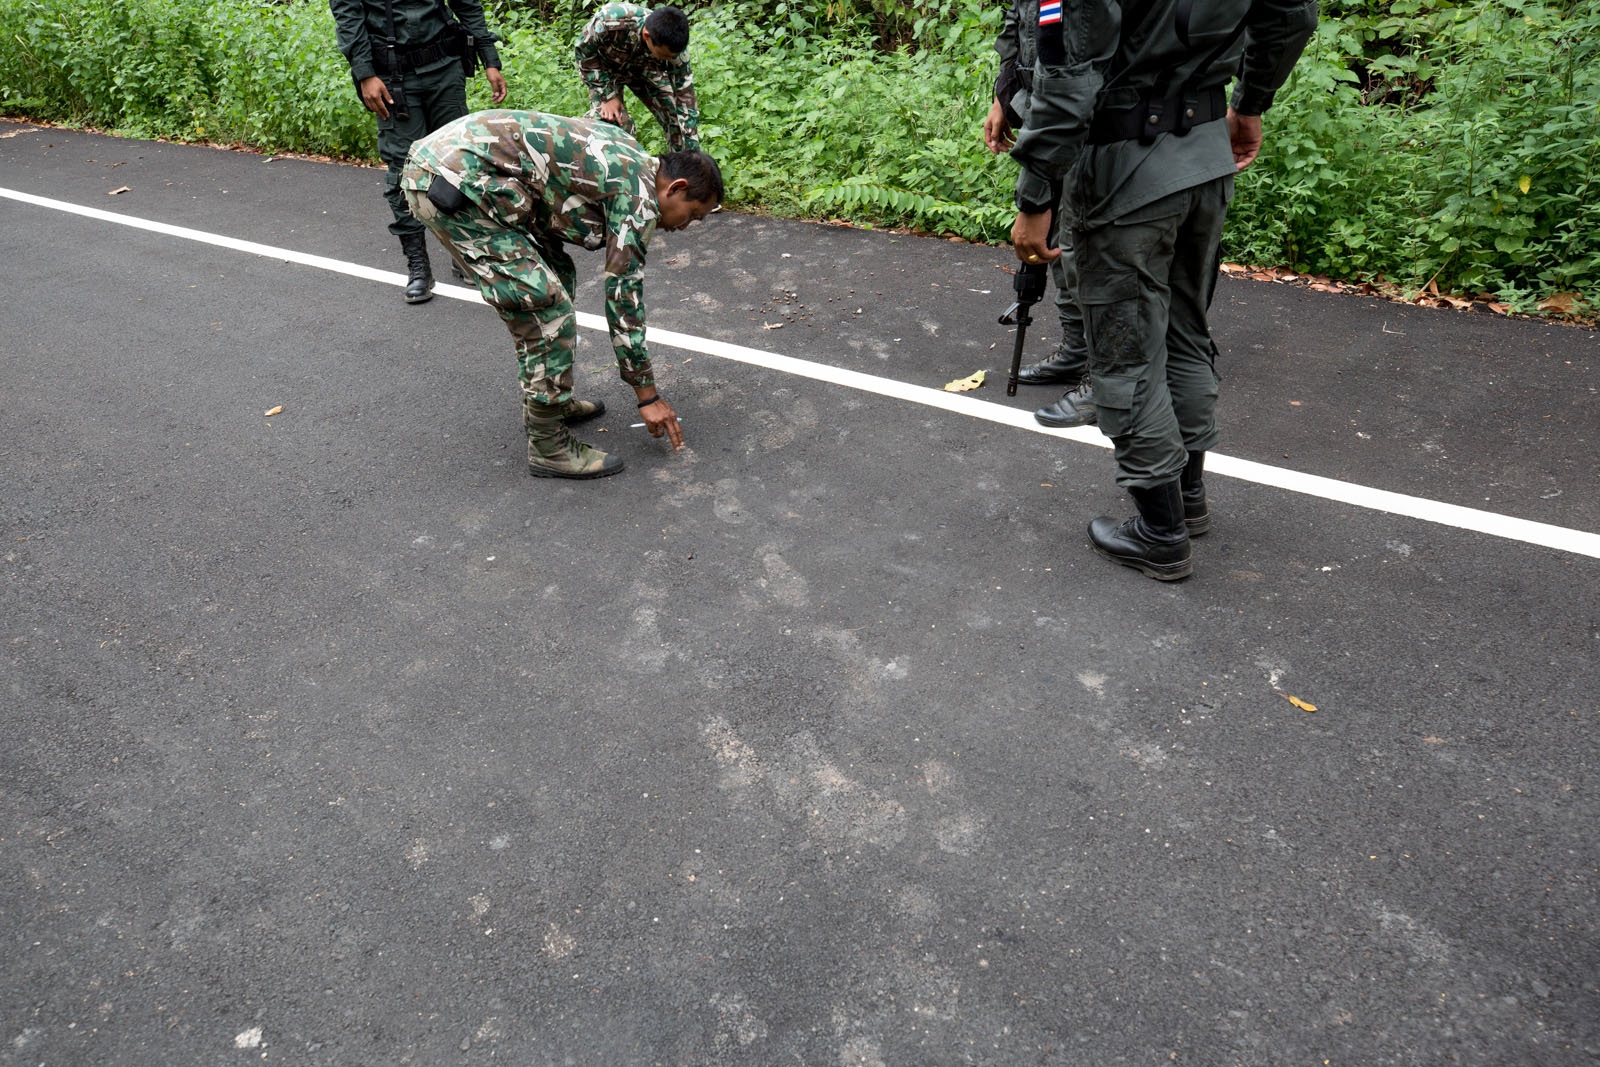 THAILAND'S FOREST RANGERS - Thai forest rangers and border patrol police inspect...